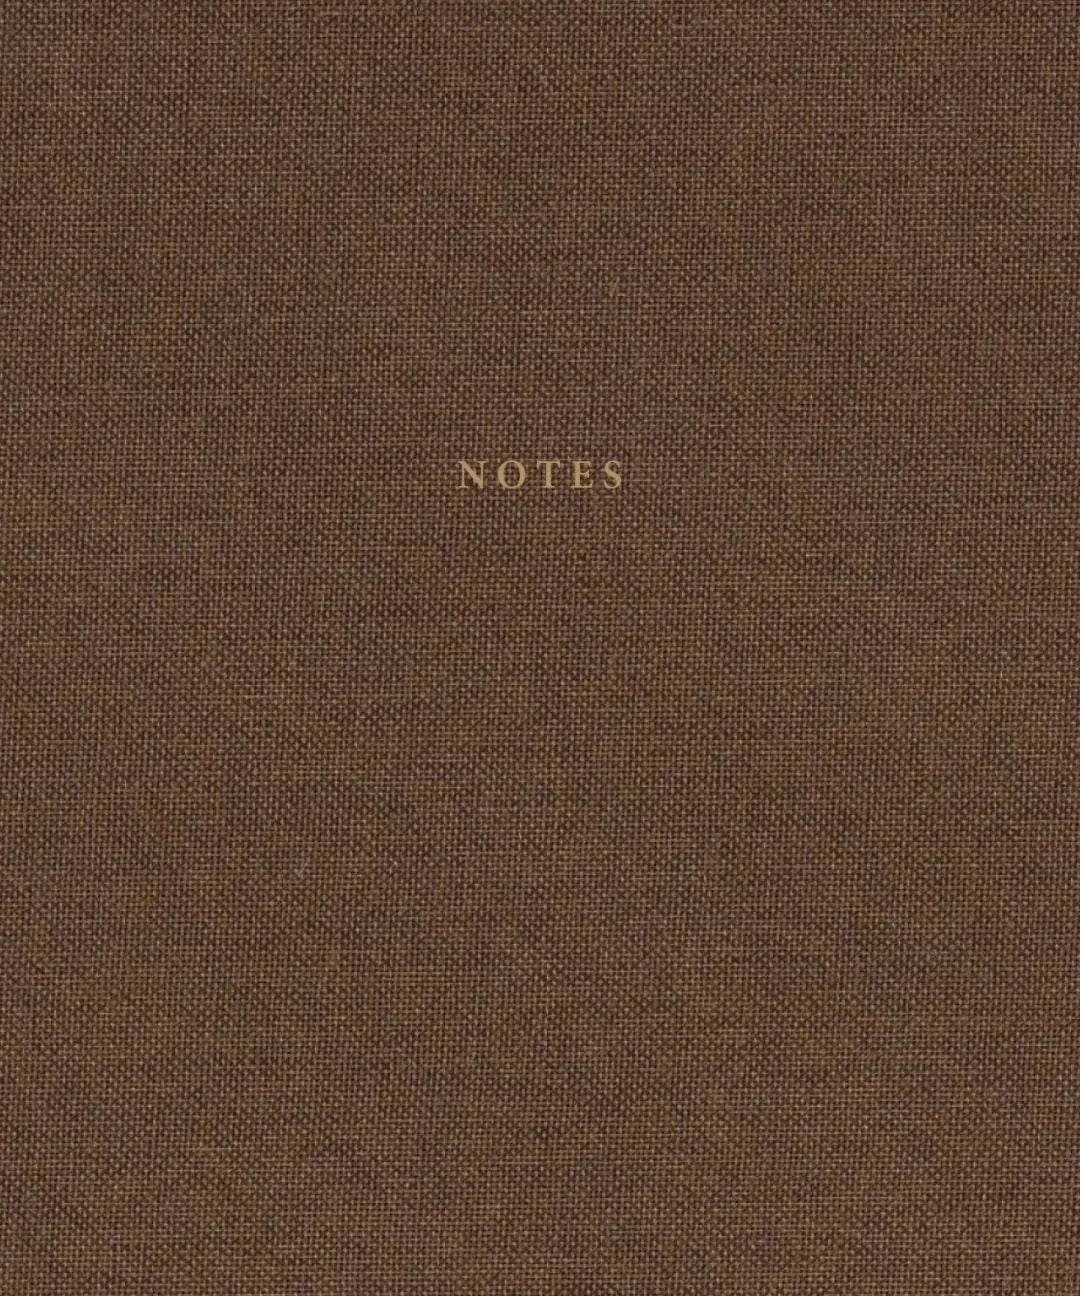 Cozy Notebook - Linen and gold